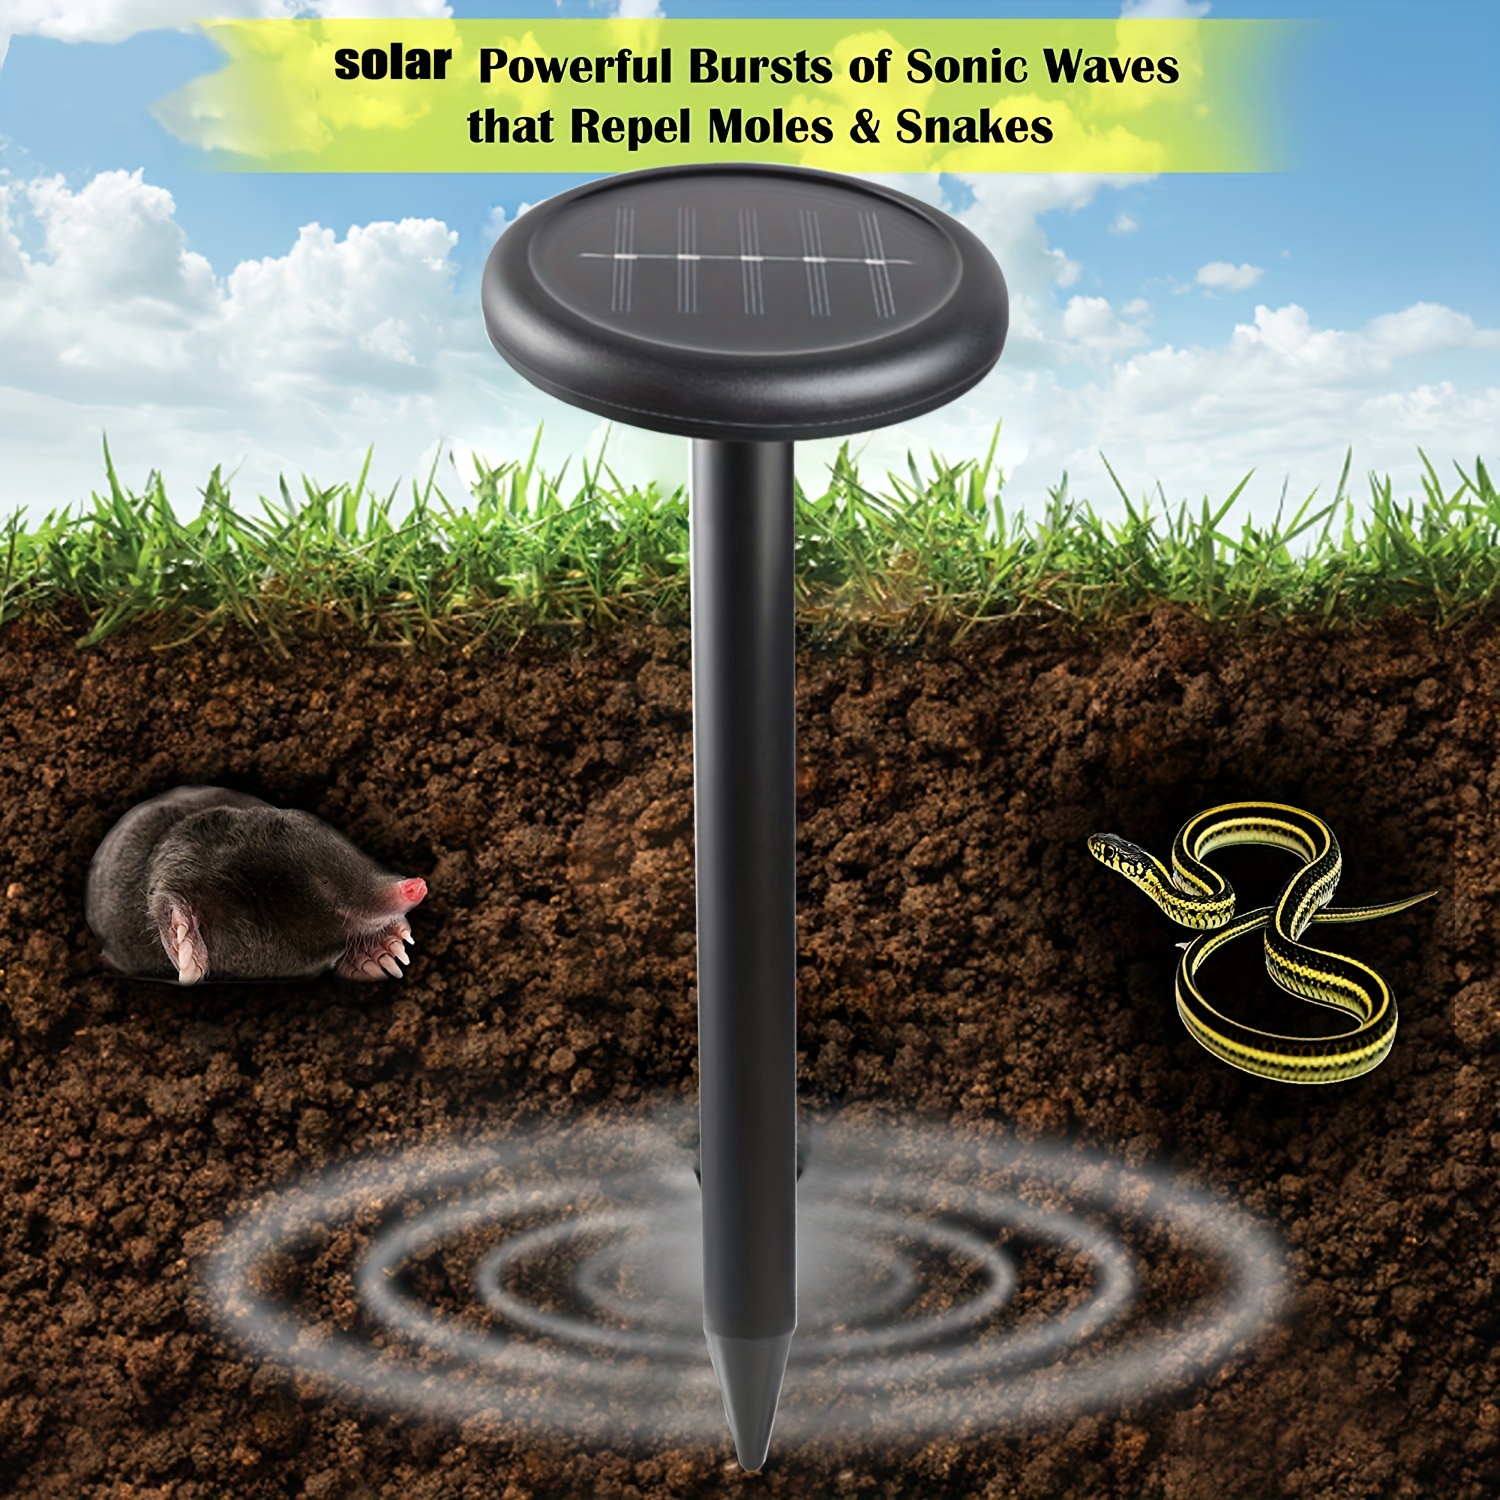 

Solar-powered Ultrasonic Pest Repeller - Drive Away Mice, Snakes & Insects From Your Garden And Lawn